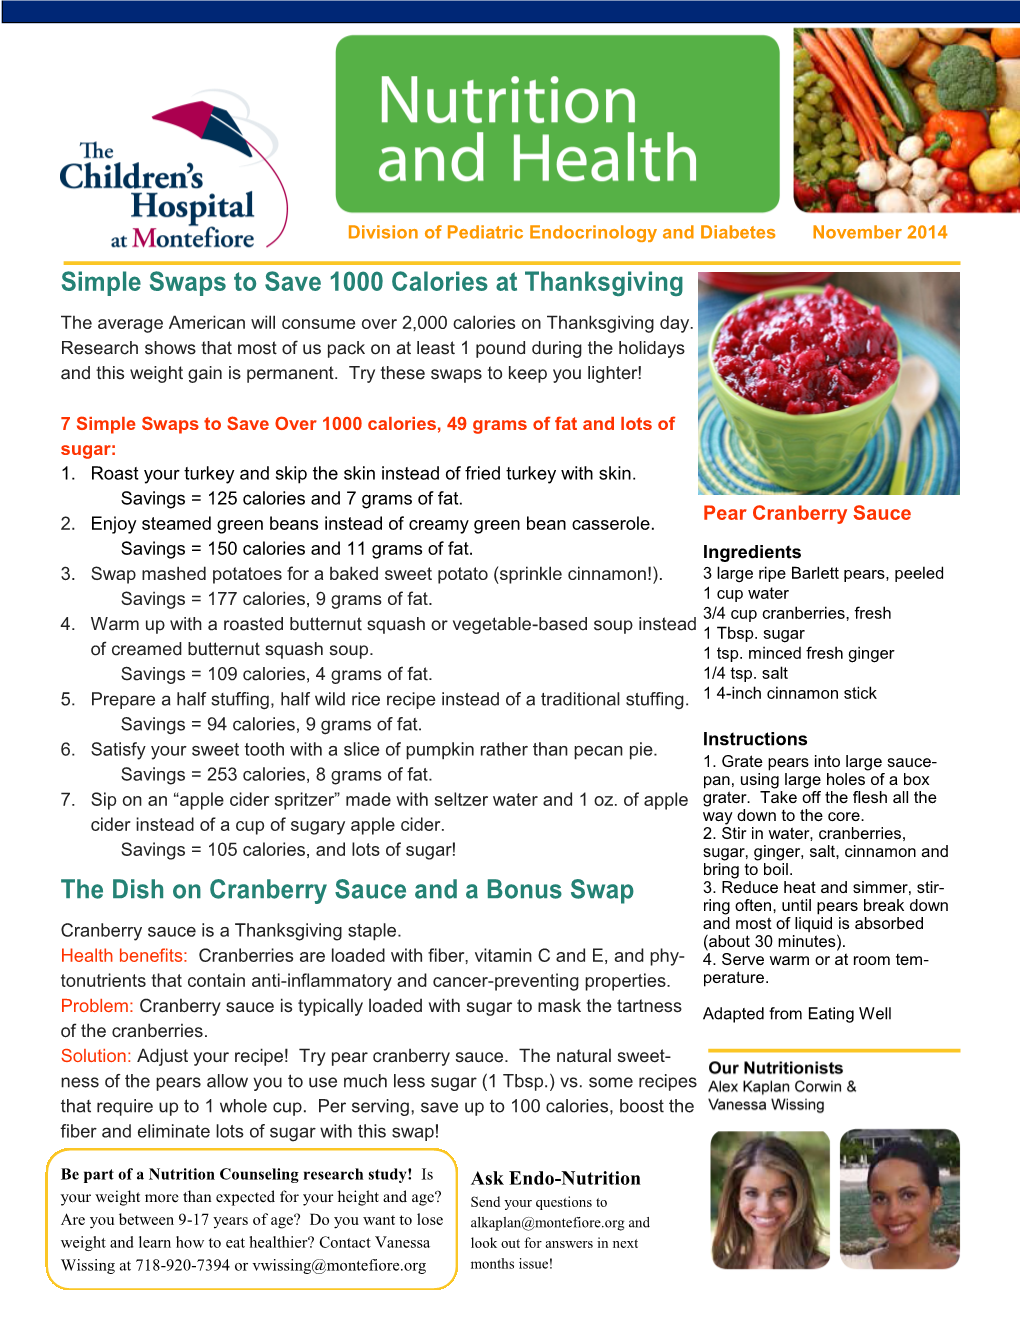 Simple Swaps to Save 1000 Calories at Thanksgiving the Dish on Cranberry Sauce and a Bonus Swap